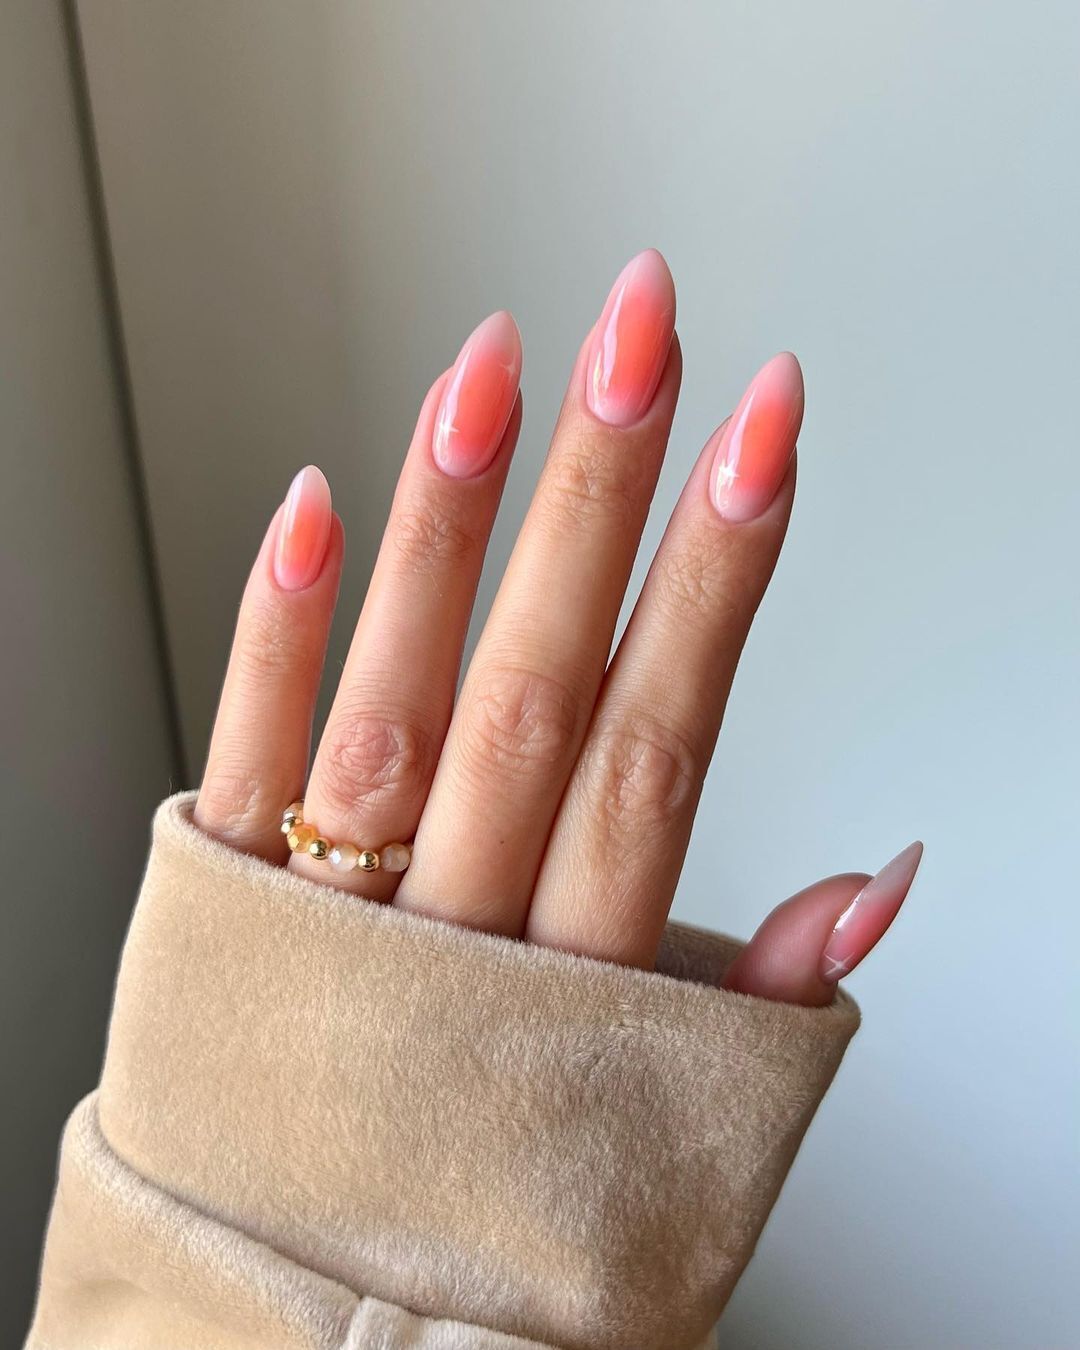 5 best summer manicure ideas that will delight all fashionistas. Photo